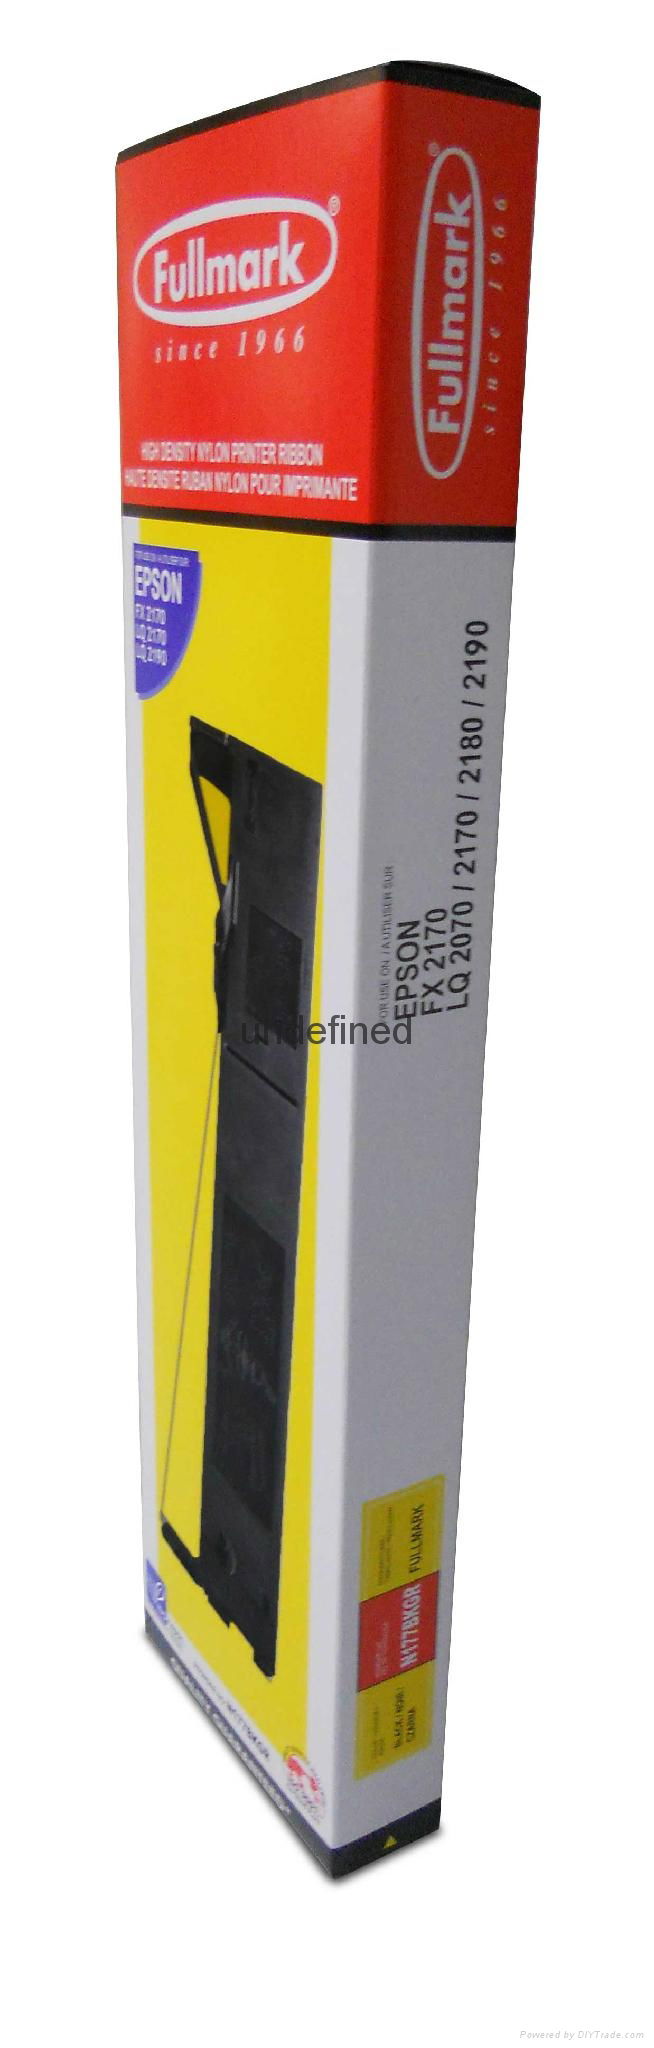 Compatible Printer Ribbon for use on Epson LQ 2170